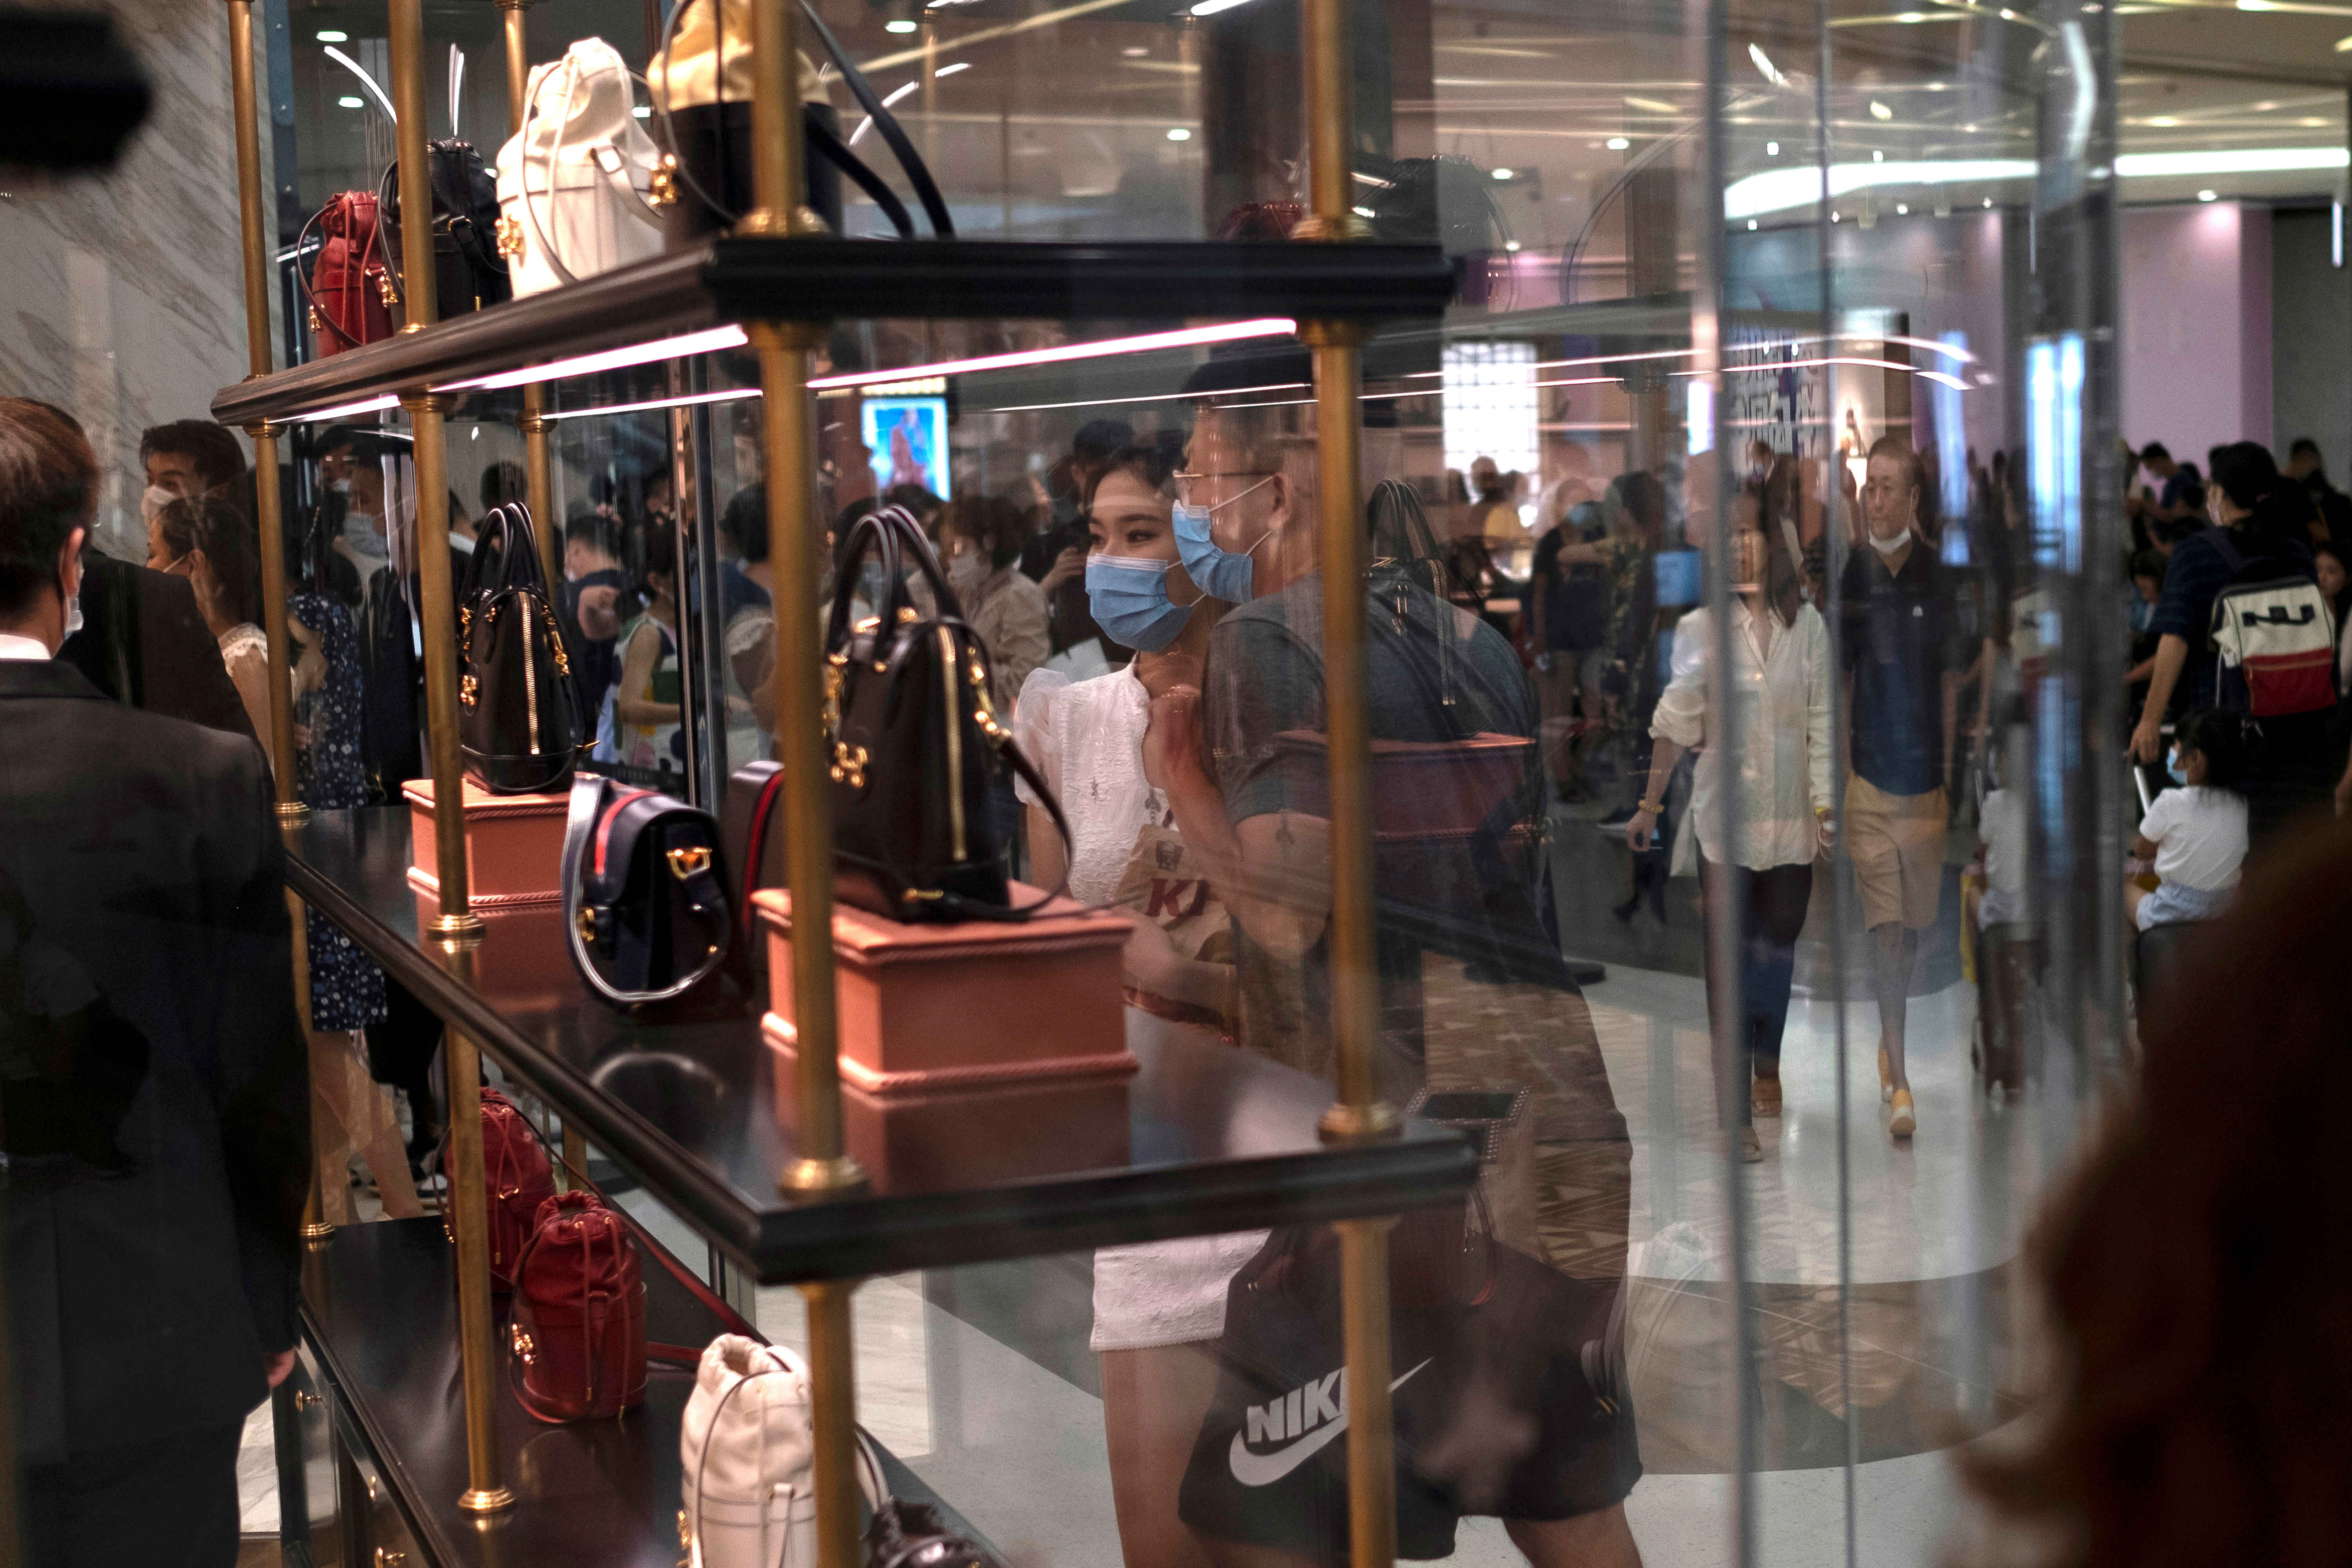 Shoppers in masks wait in line at the Louis Vuitton store in the